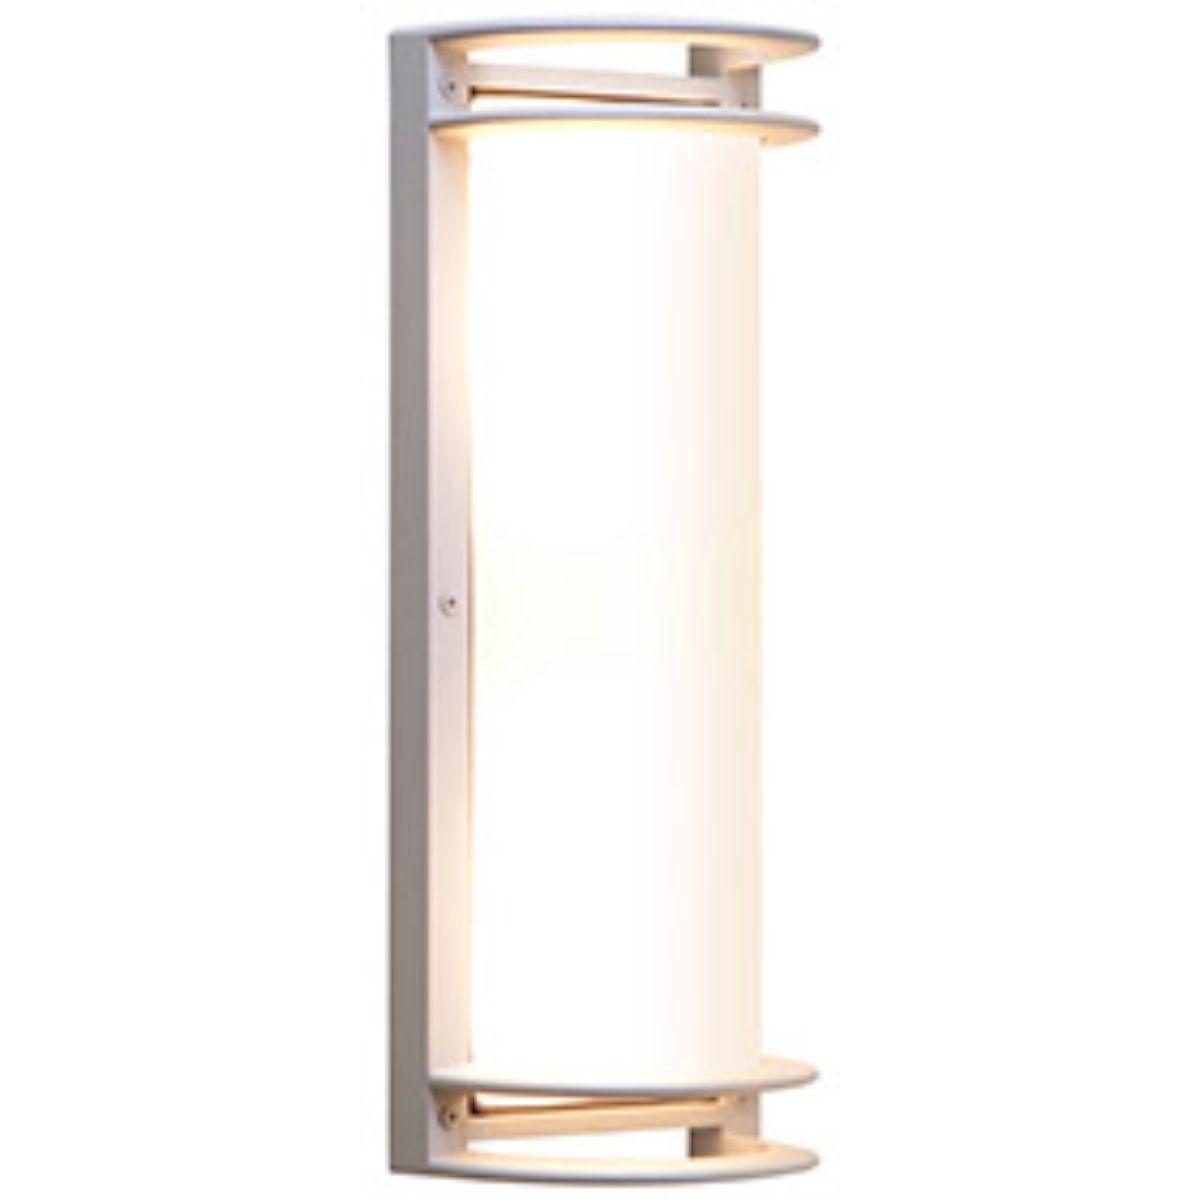 Nevis 17 In. Outdoor LED Wall Light 1500 Lumens